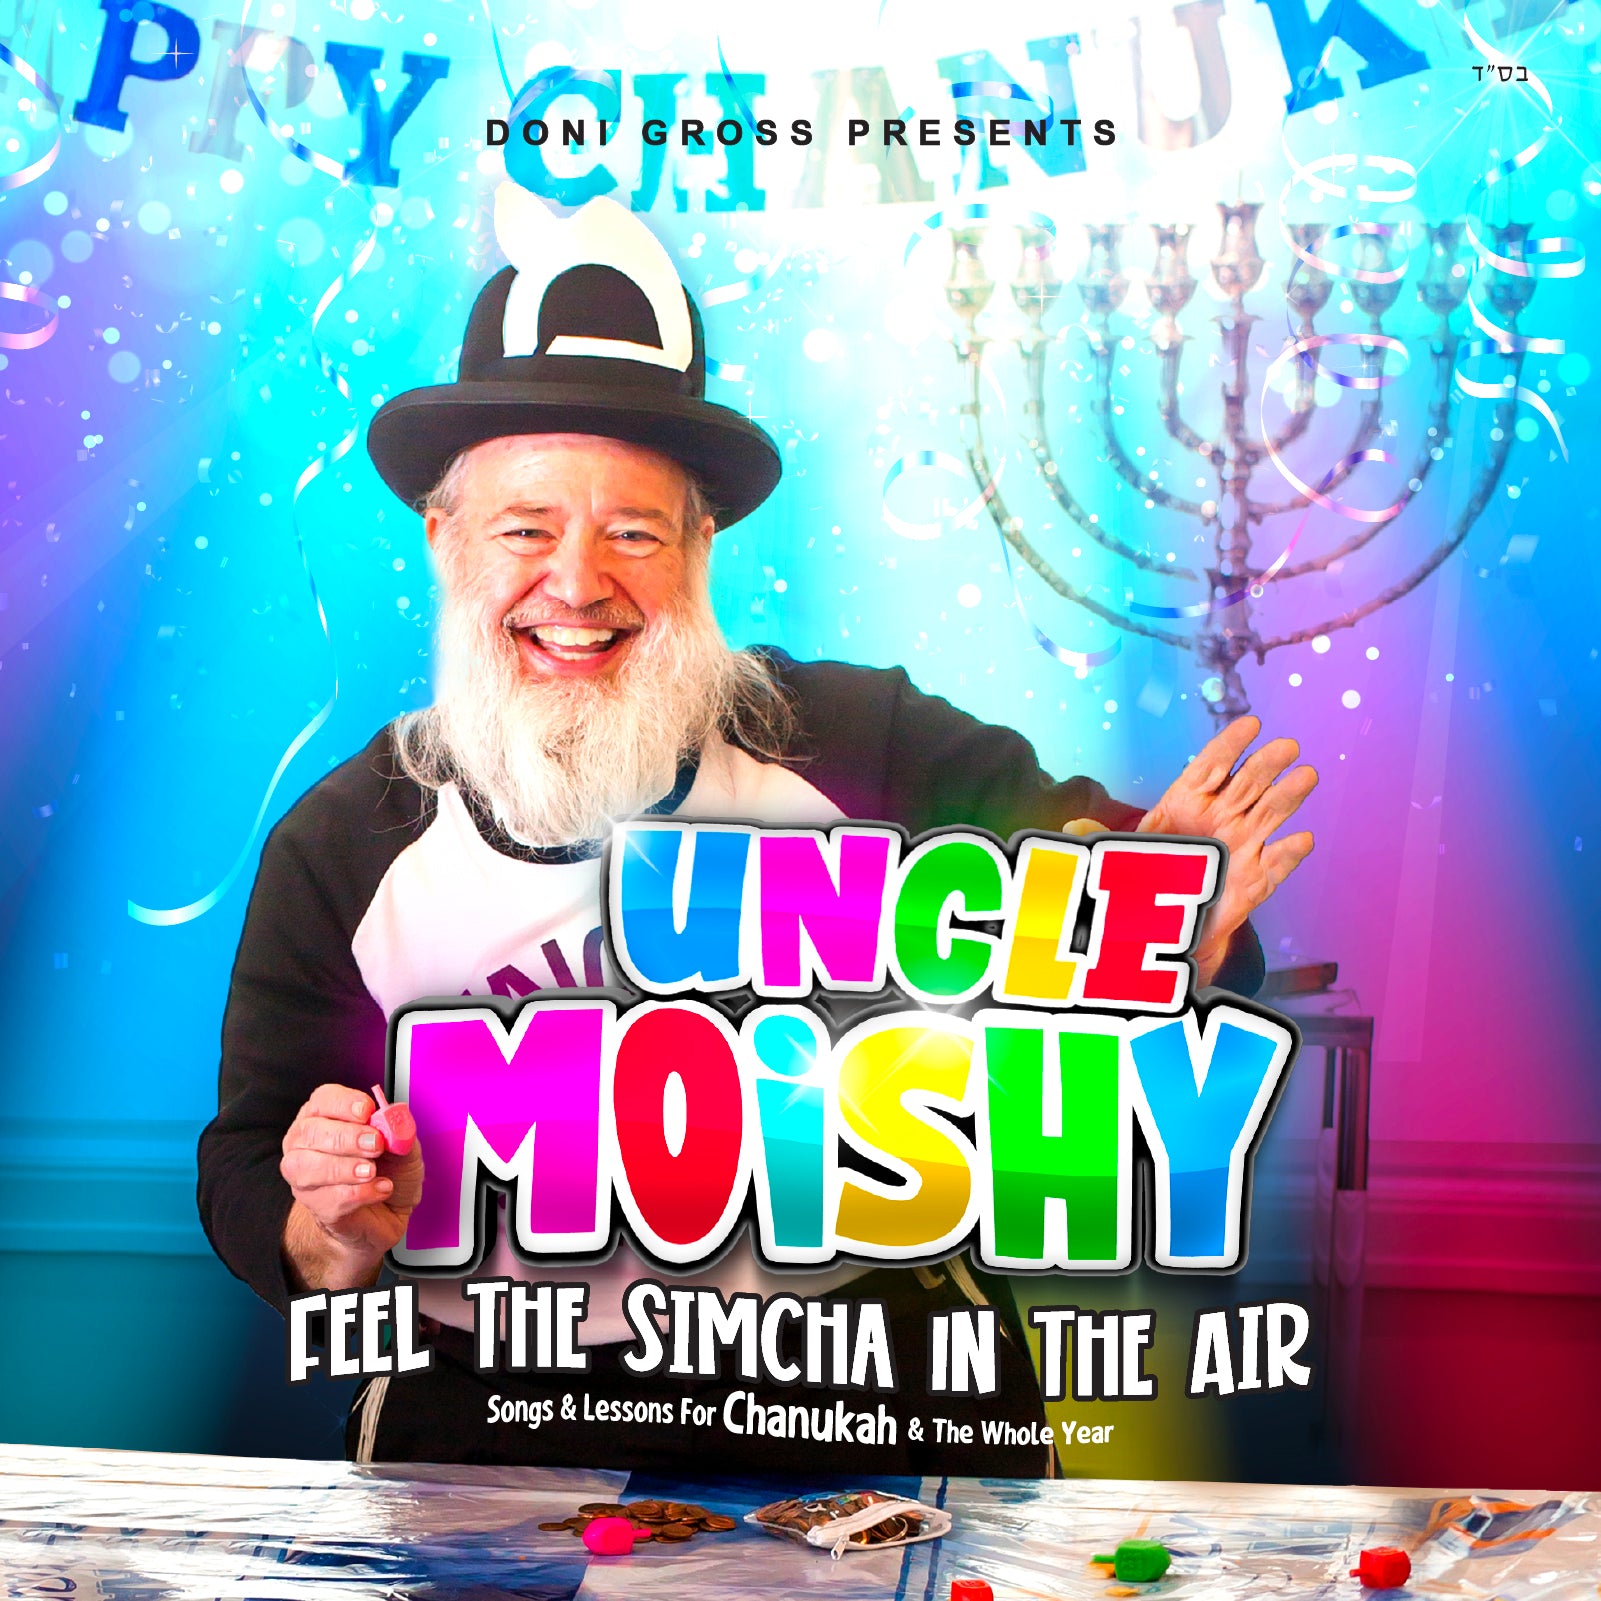 Uncle Moishy - Feel the Simcha in the Air